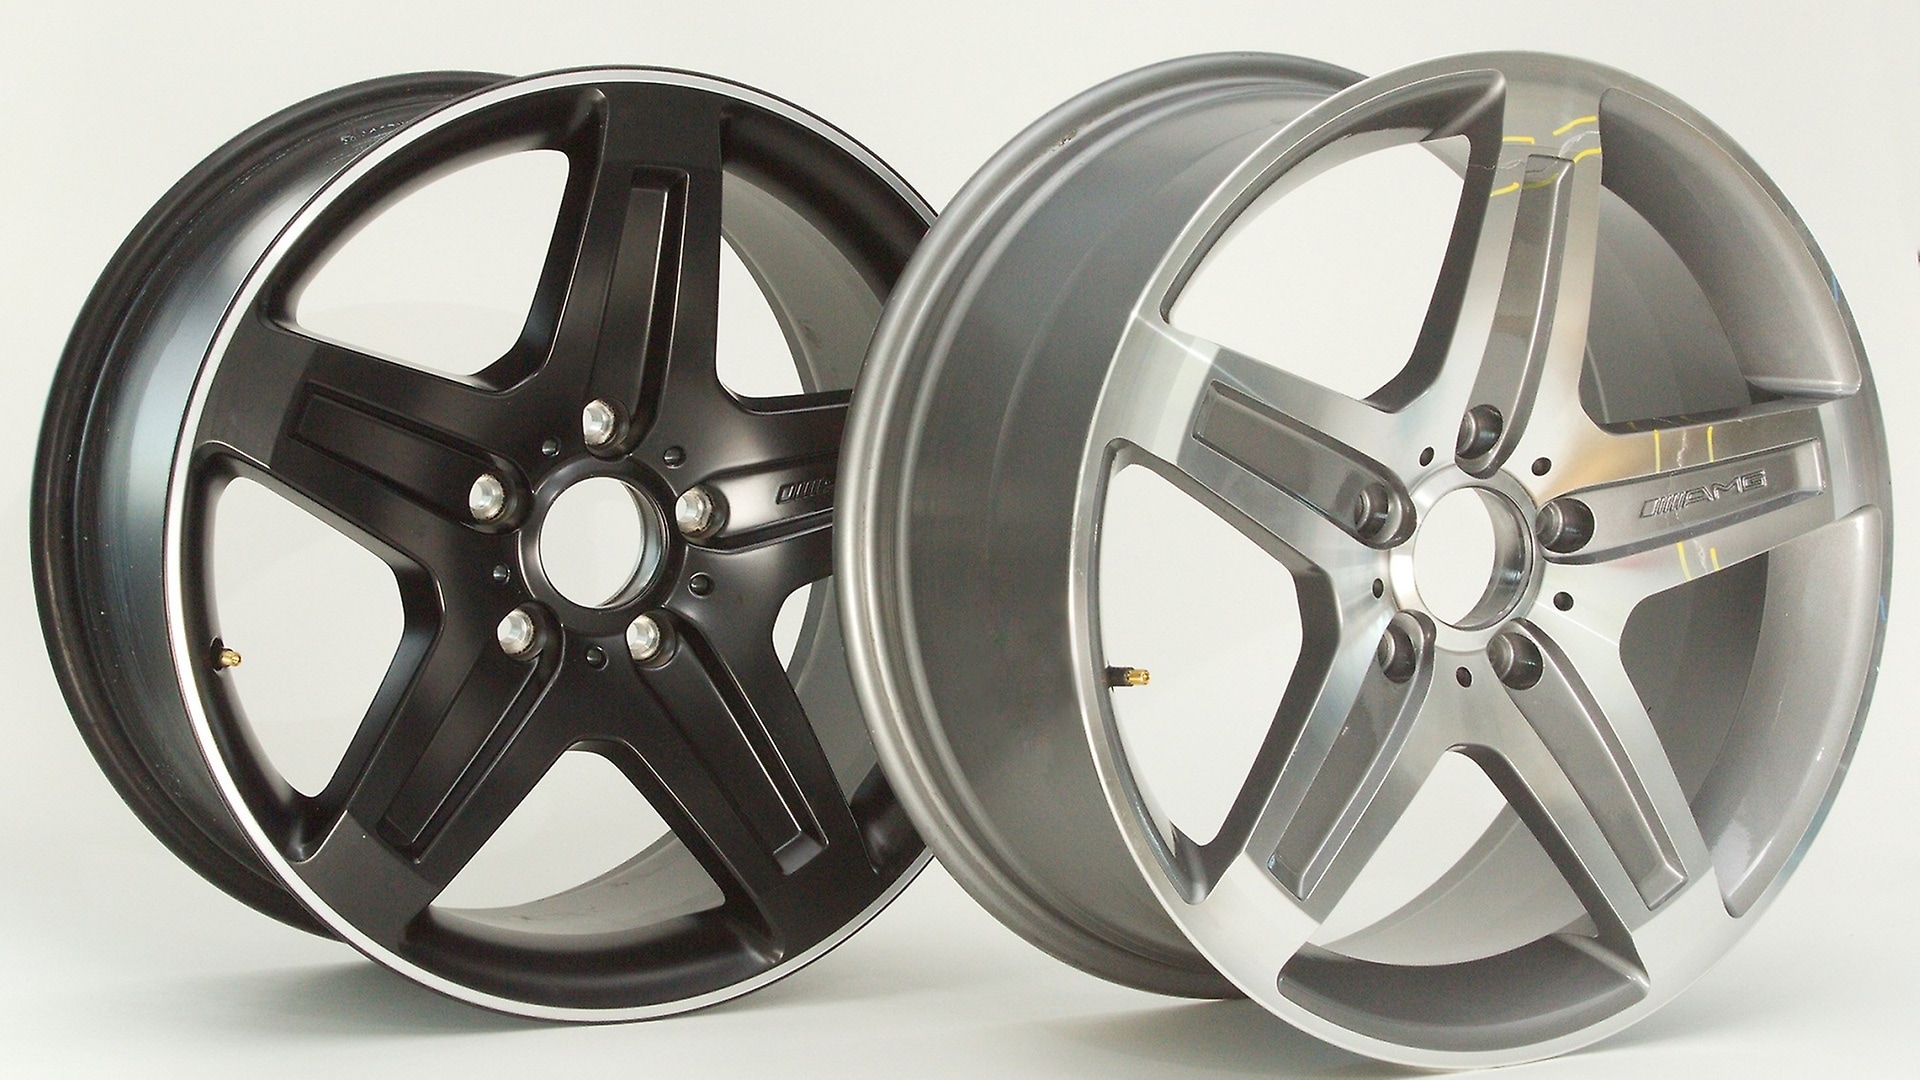  Rims after stress test: Original (left) and counterfeit (right).